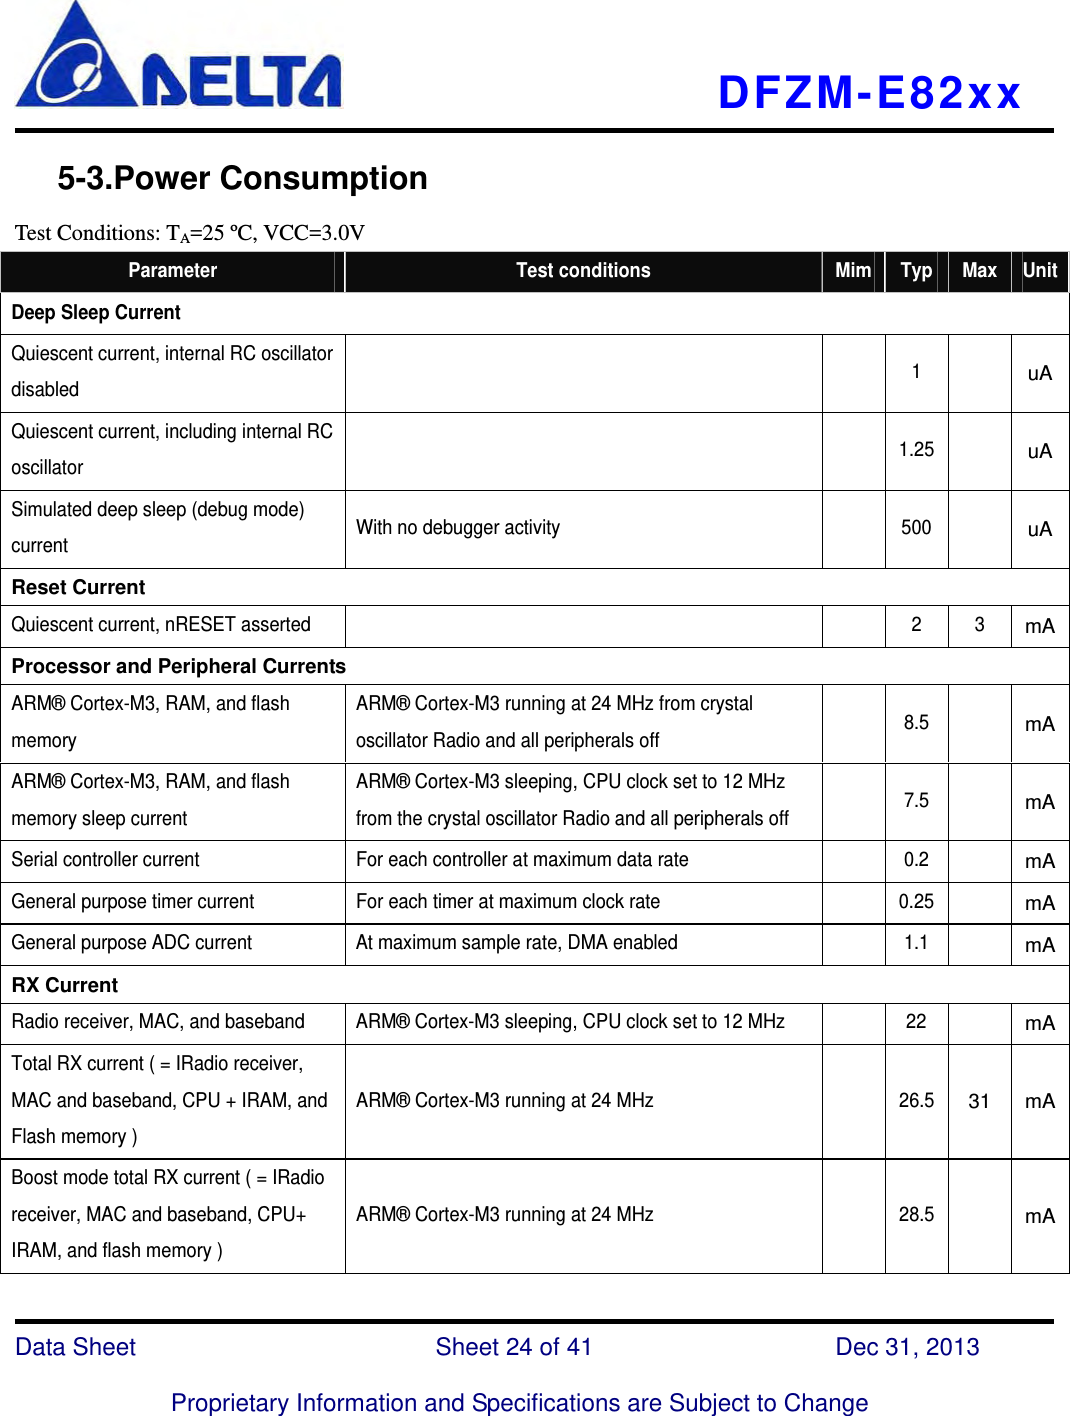   DFZM-E82xx   Data Sheet                 Sheet 24 of 41           Dec 31, 2013  Proprietary Information and Specifications are Subject to Change    5-3.Power Consumption Test Conditions: TA=25 ºC, VCC=3.0V Parameter  Test conditions  Mim  Typ Max UnitDeep Sleep Current Quiescent current, internal RC oscillator disabled    1  uAQuiescent current, including internal RC oscillator    1.25  uASimulated deep sleep (debug mode) current  With no debugger activity    500  uAReset Current Quiescent current, nRESET asserted      2  3 mAProcessor and Peripheral Currents ARM® Cortex-M3, RAM, and flash memory ARM® Cortex-M3 running at 24 MHz from crystal oscillator Radio and all peripherals off   8.5  mAARM® Cortex-M3, RAM, and flash memory sleep current ARM® Cortex-M3 sleeping, CPU clock set to 12 MHz from the crystal oscillator Radio and all peripherals off   7.5  mASerial controller current  For each controller at maximum data rate    0.2  mAGeneral purpose timer current  For each timer at maximum clock rate    0.25 mAGeneral purpose ADC current  At maximum sample rate, DMA enabled    1.1  mARX Current Radio receiver, MAC, and baseband  ARM® Cortex-M3 sleeping, CPU clock set to 12 MHz    22  mATotal RX current ( = IRadio receiver, MAC and baseband, CPU + IRAM, and Flash memory ) ARM® Cortex-M3 running at 24 MHz    26.531 mABoost mode total RX current ( = IRadio receiver, MAC and baseband, CPU+ IRAM, and flash memory ) ARM® Cortex-M3 running at 24 MHz    28.5 mA